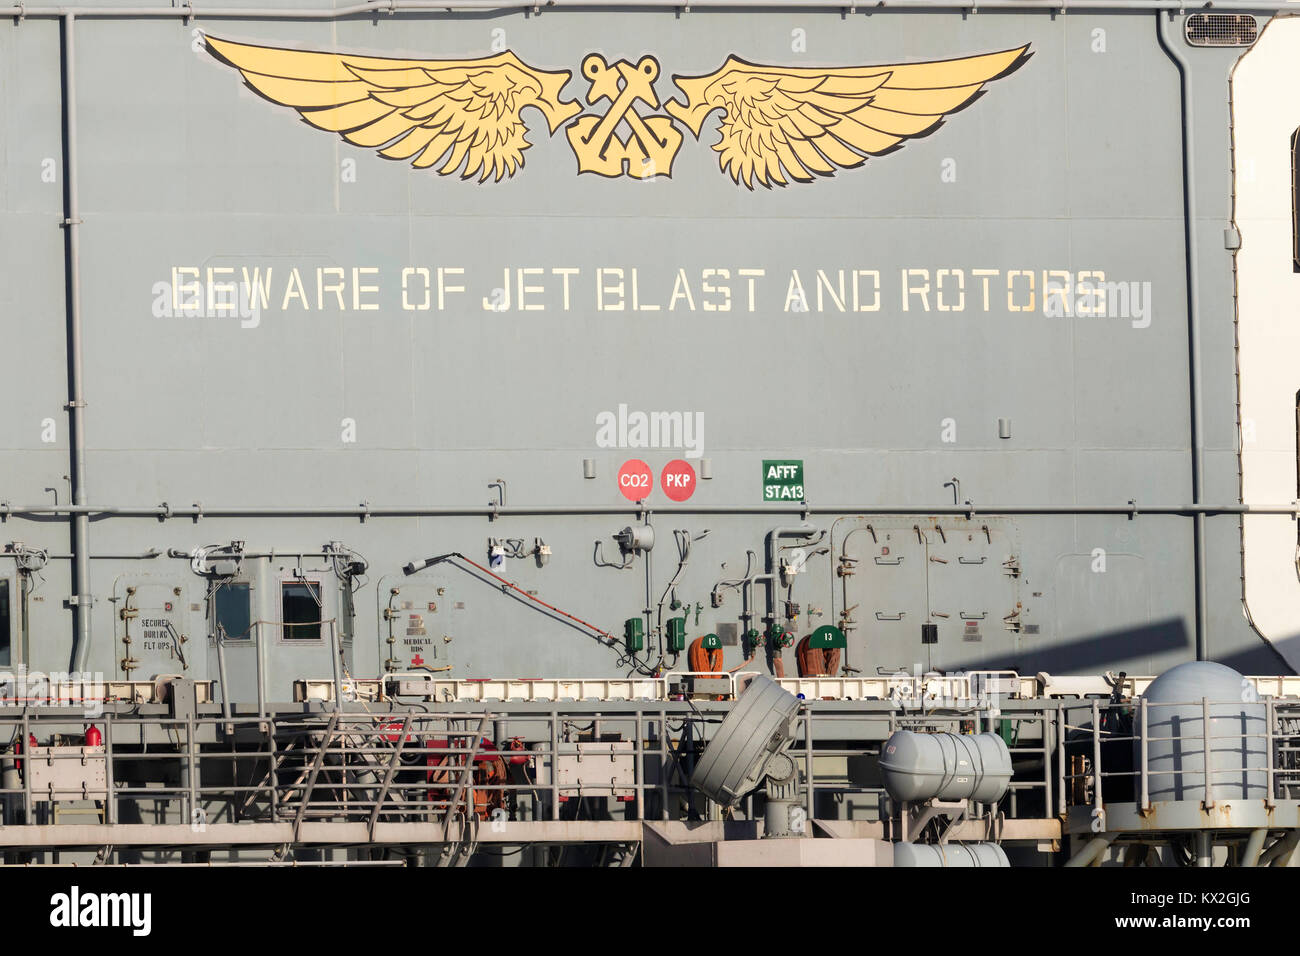 Beware of jet blast and rotors sign on the deck of the USS Bonhomme Richard (LHD-6) Wasp-class amphibious assa Stock Photo